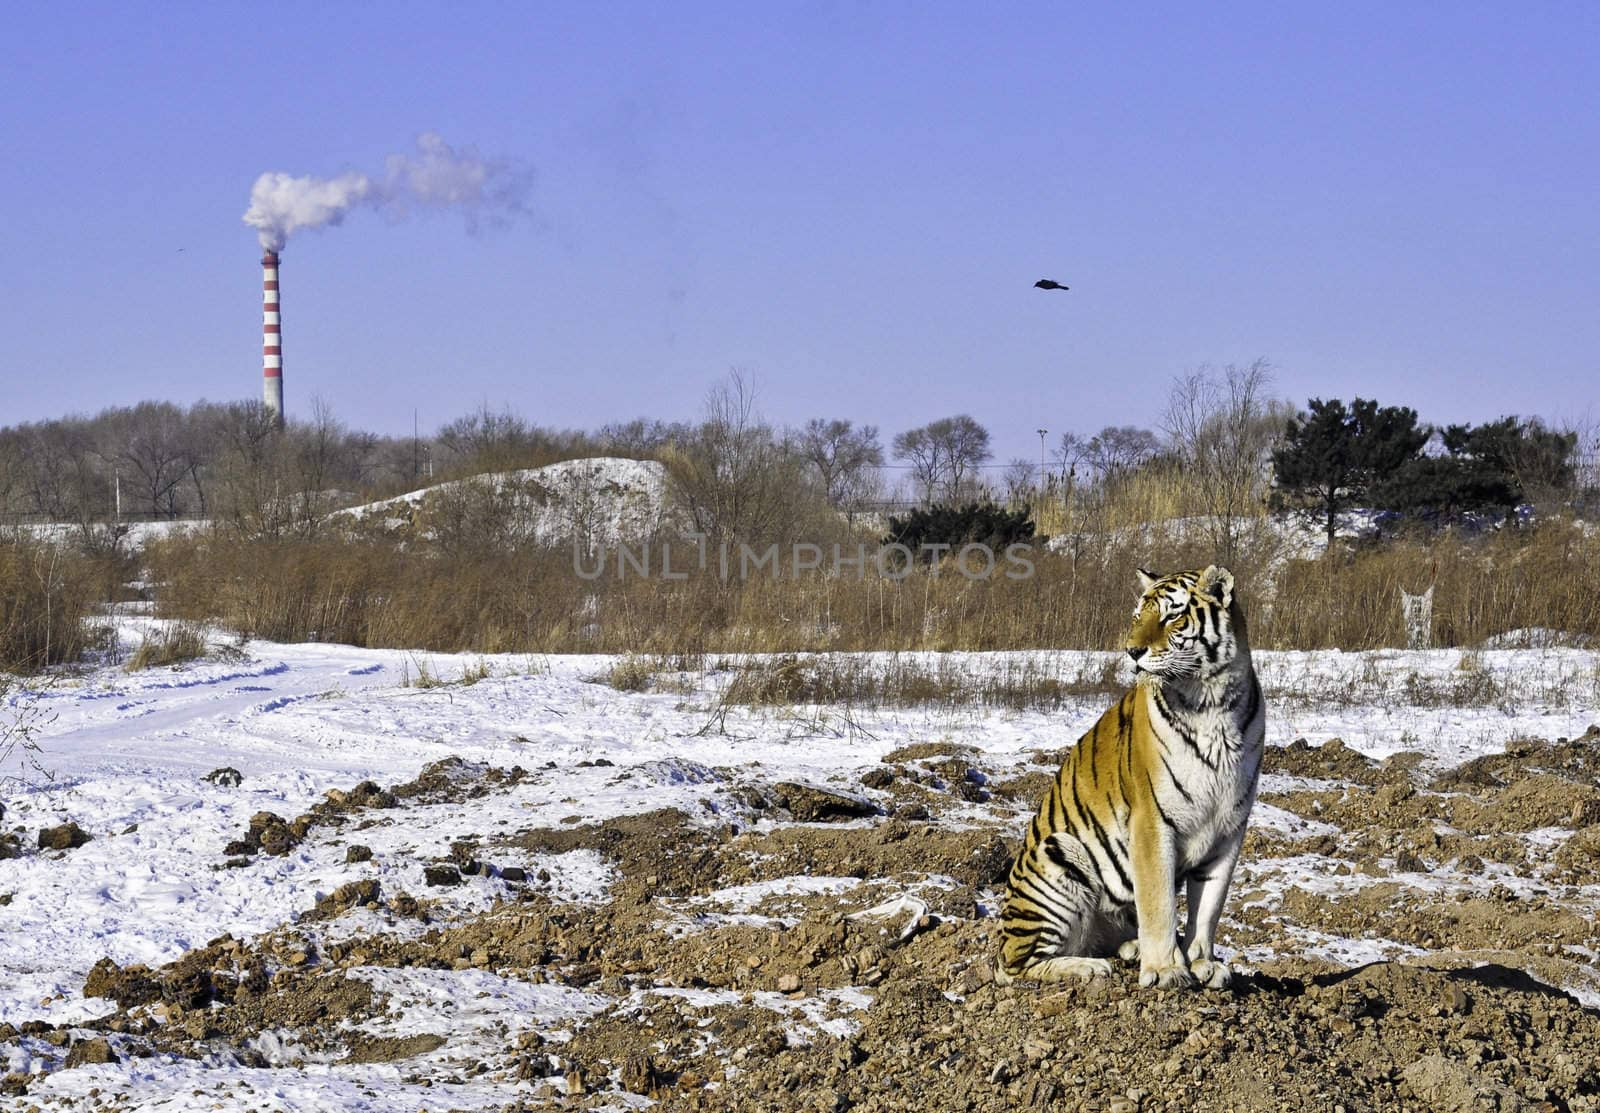 A tiger sits as a smokestack pollutes the air and his habitat is destroyed